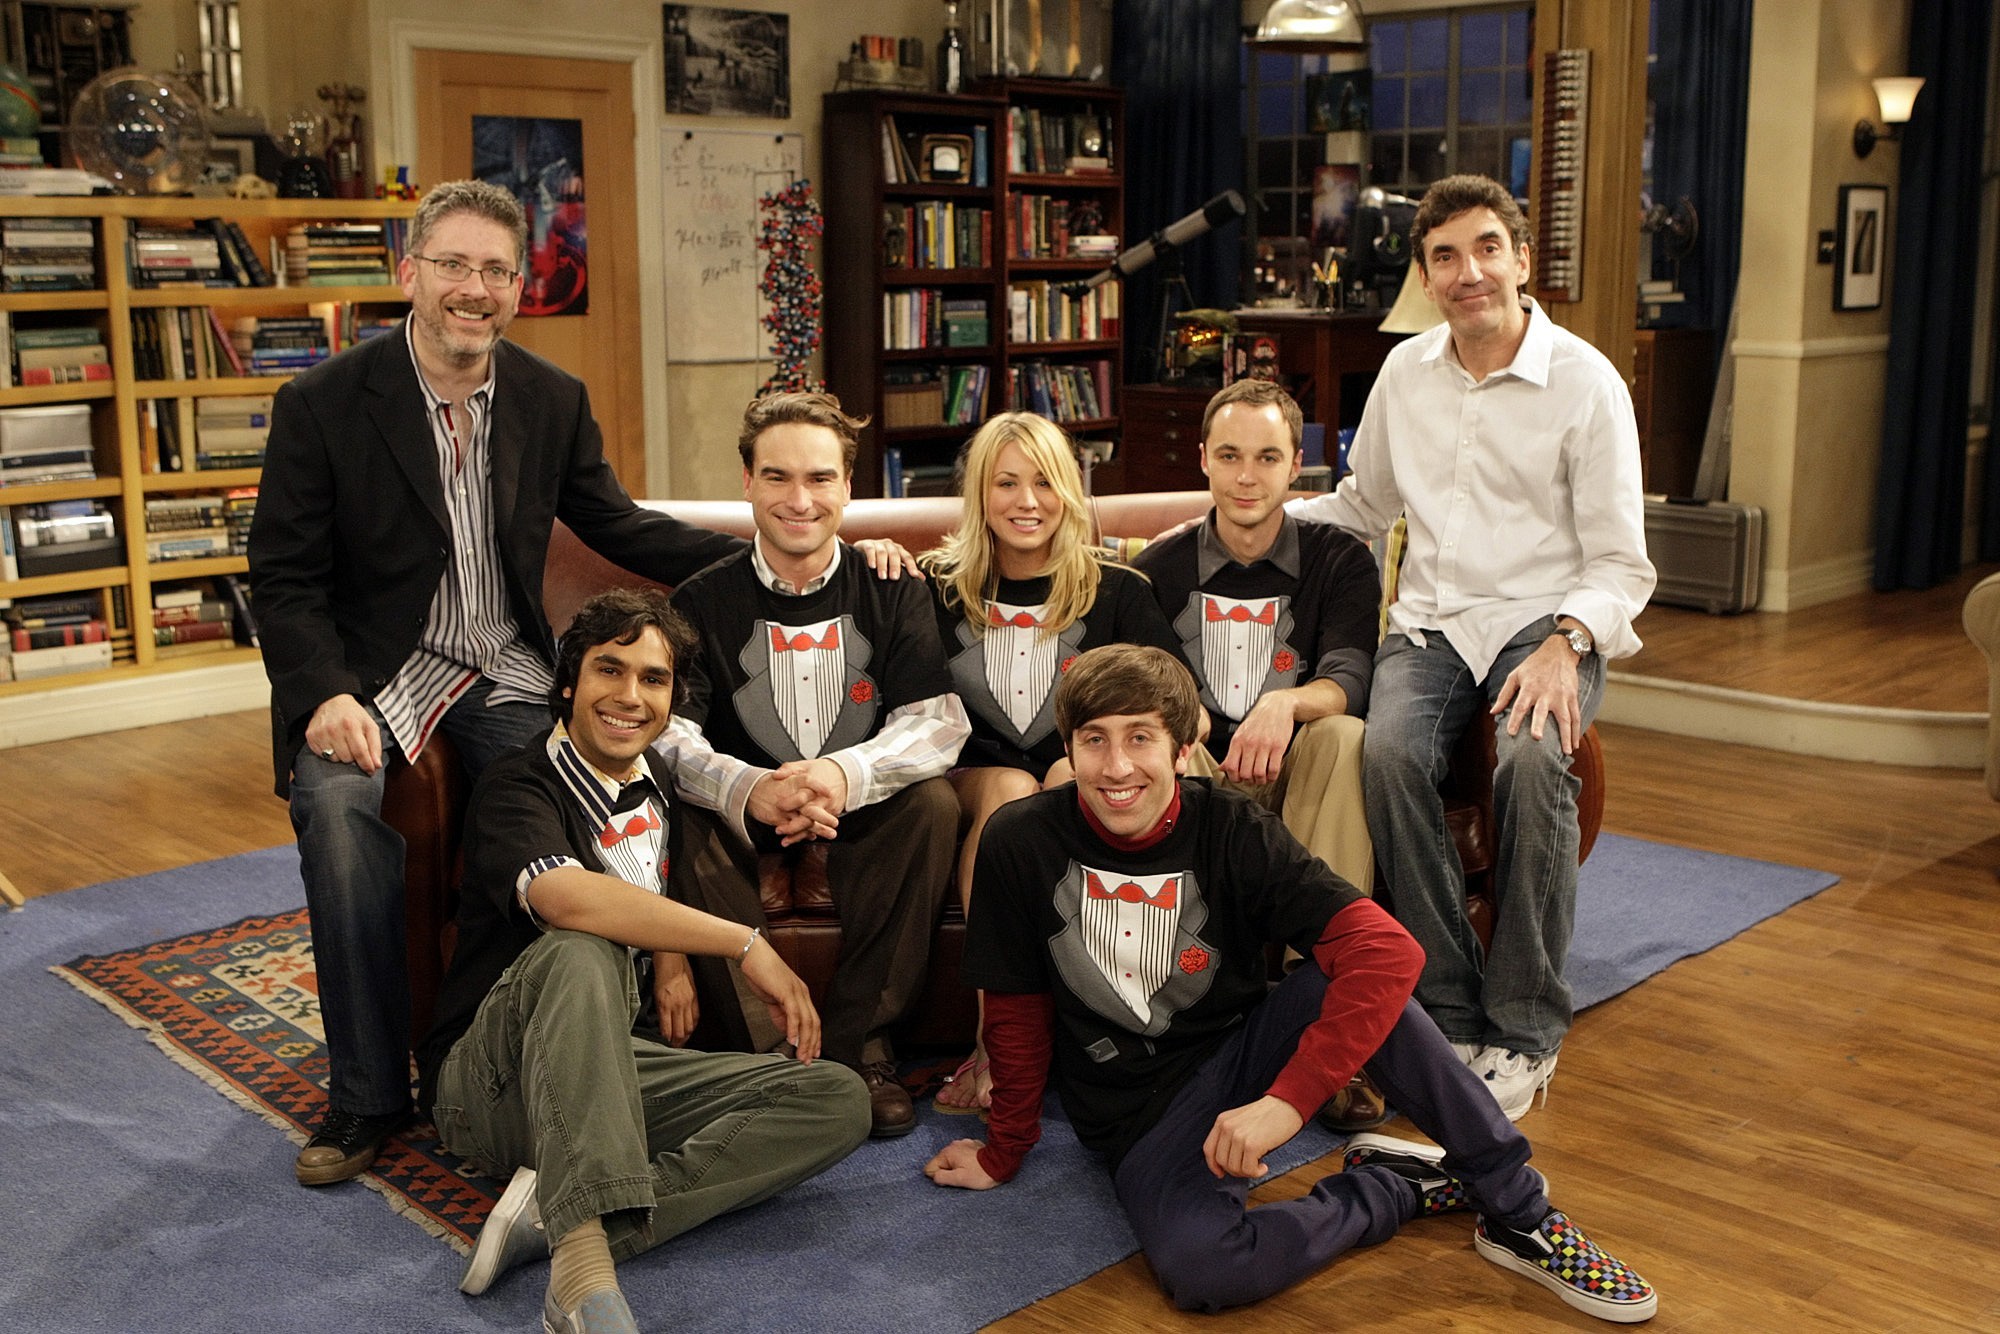 The Big Bang Theory cast’s friendship one year after series finale: From mini-reunions to WhatsApp groups